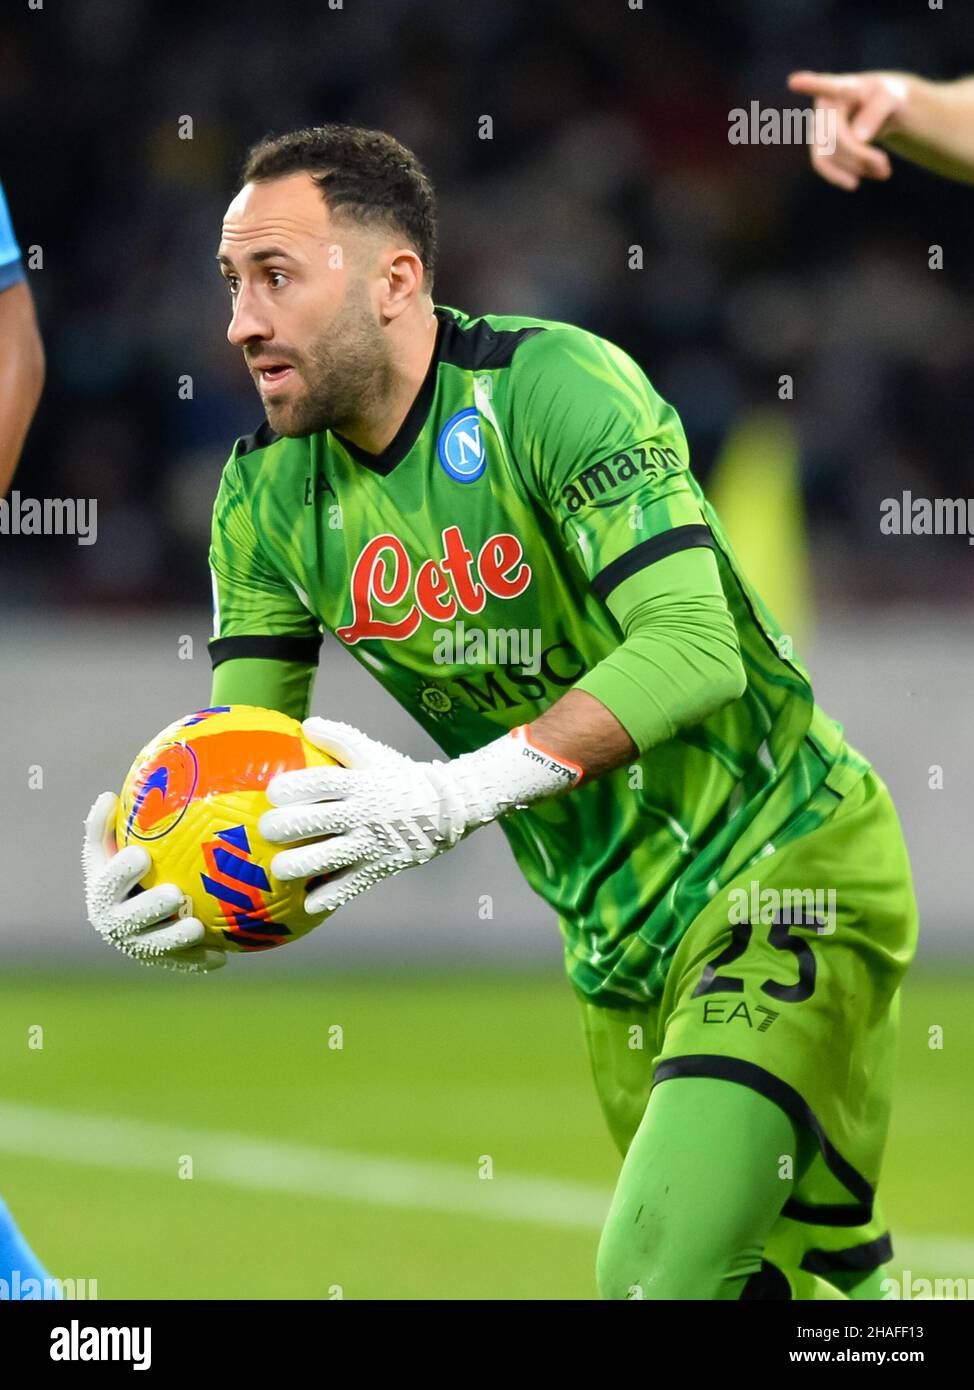 Empoli Goalkeeper High Resolution Stock Photography and Images - Alamy